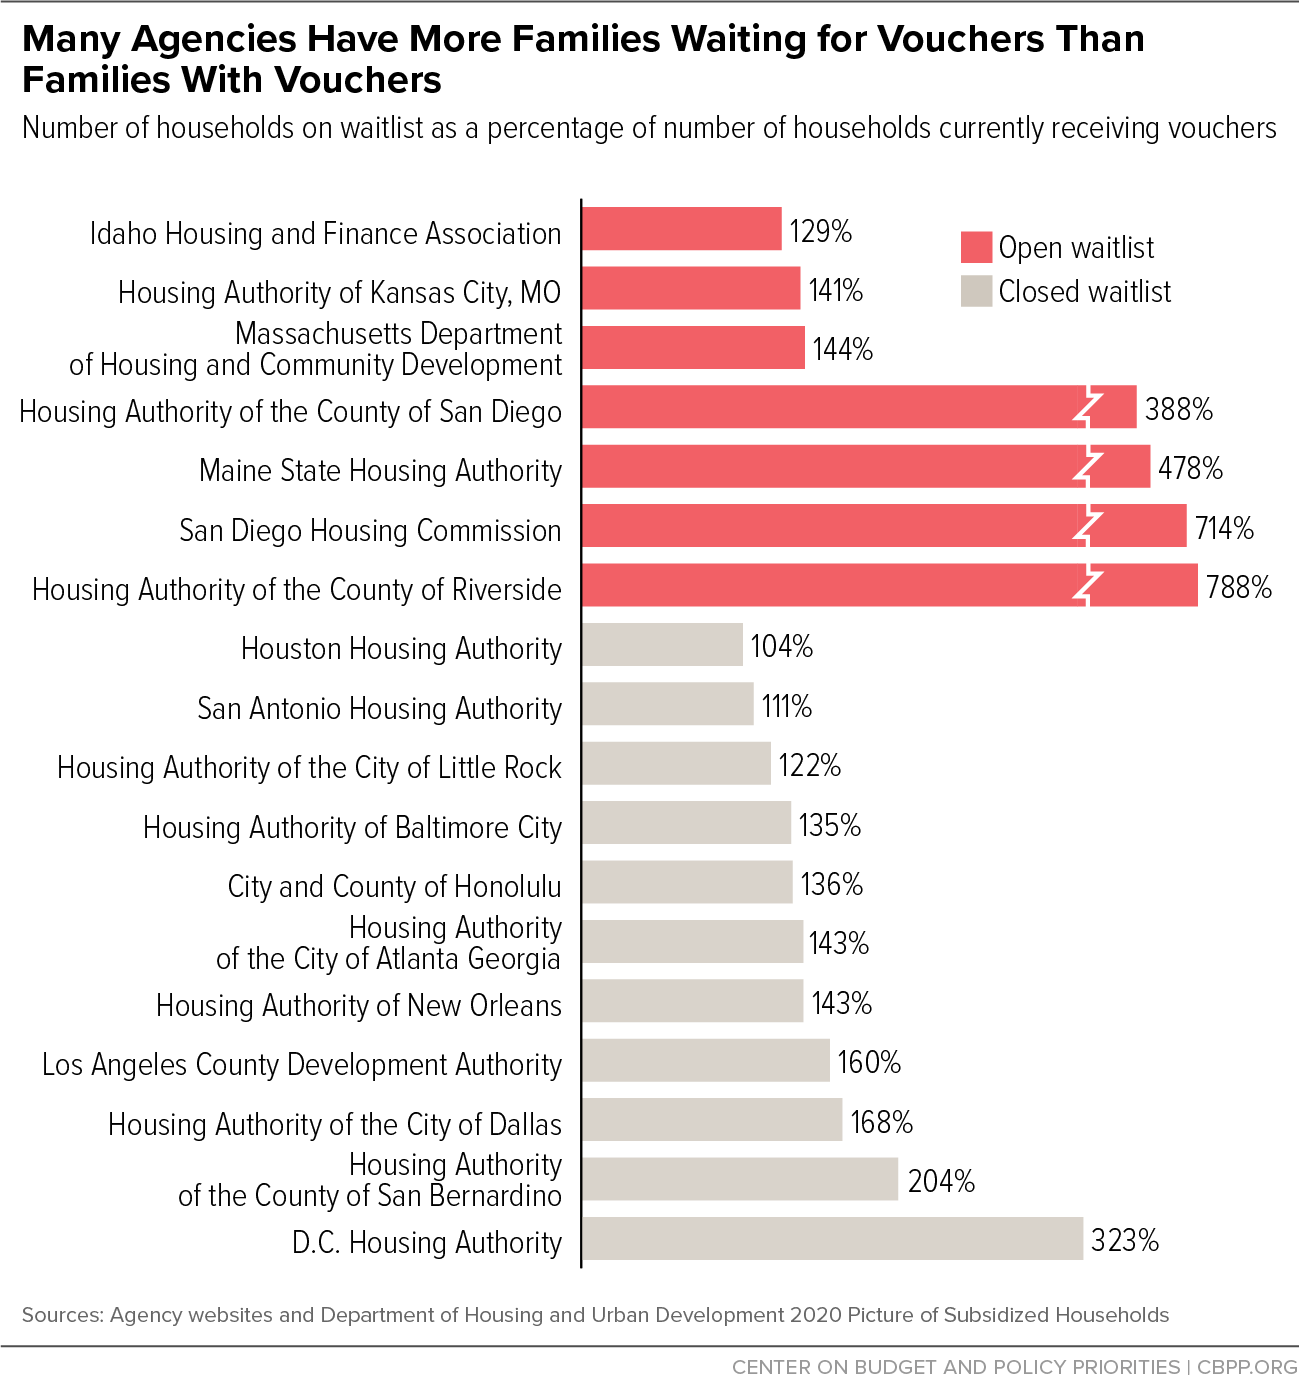 Many Agencies Have More Families Waiting for Vouchers Than Families With Vouchers